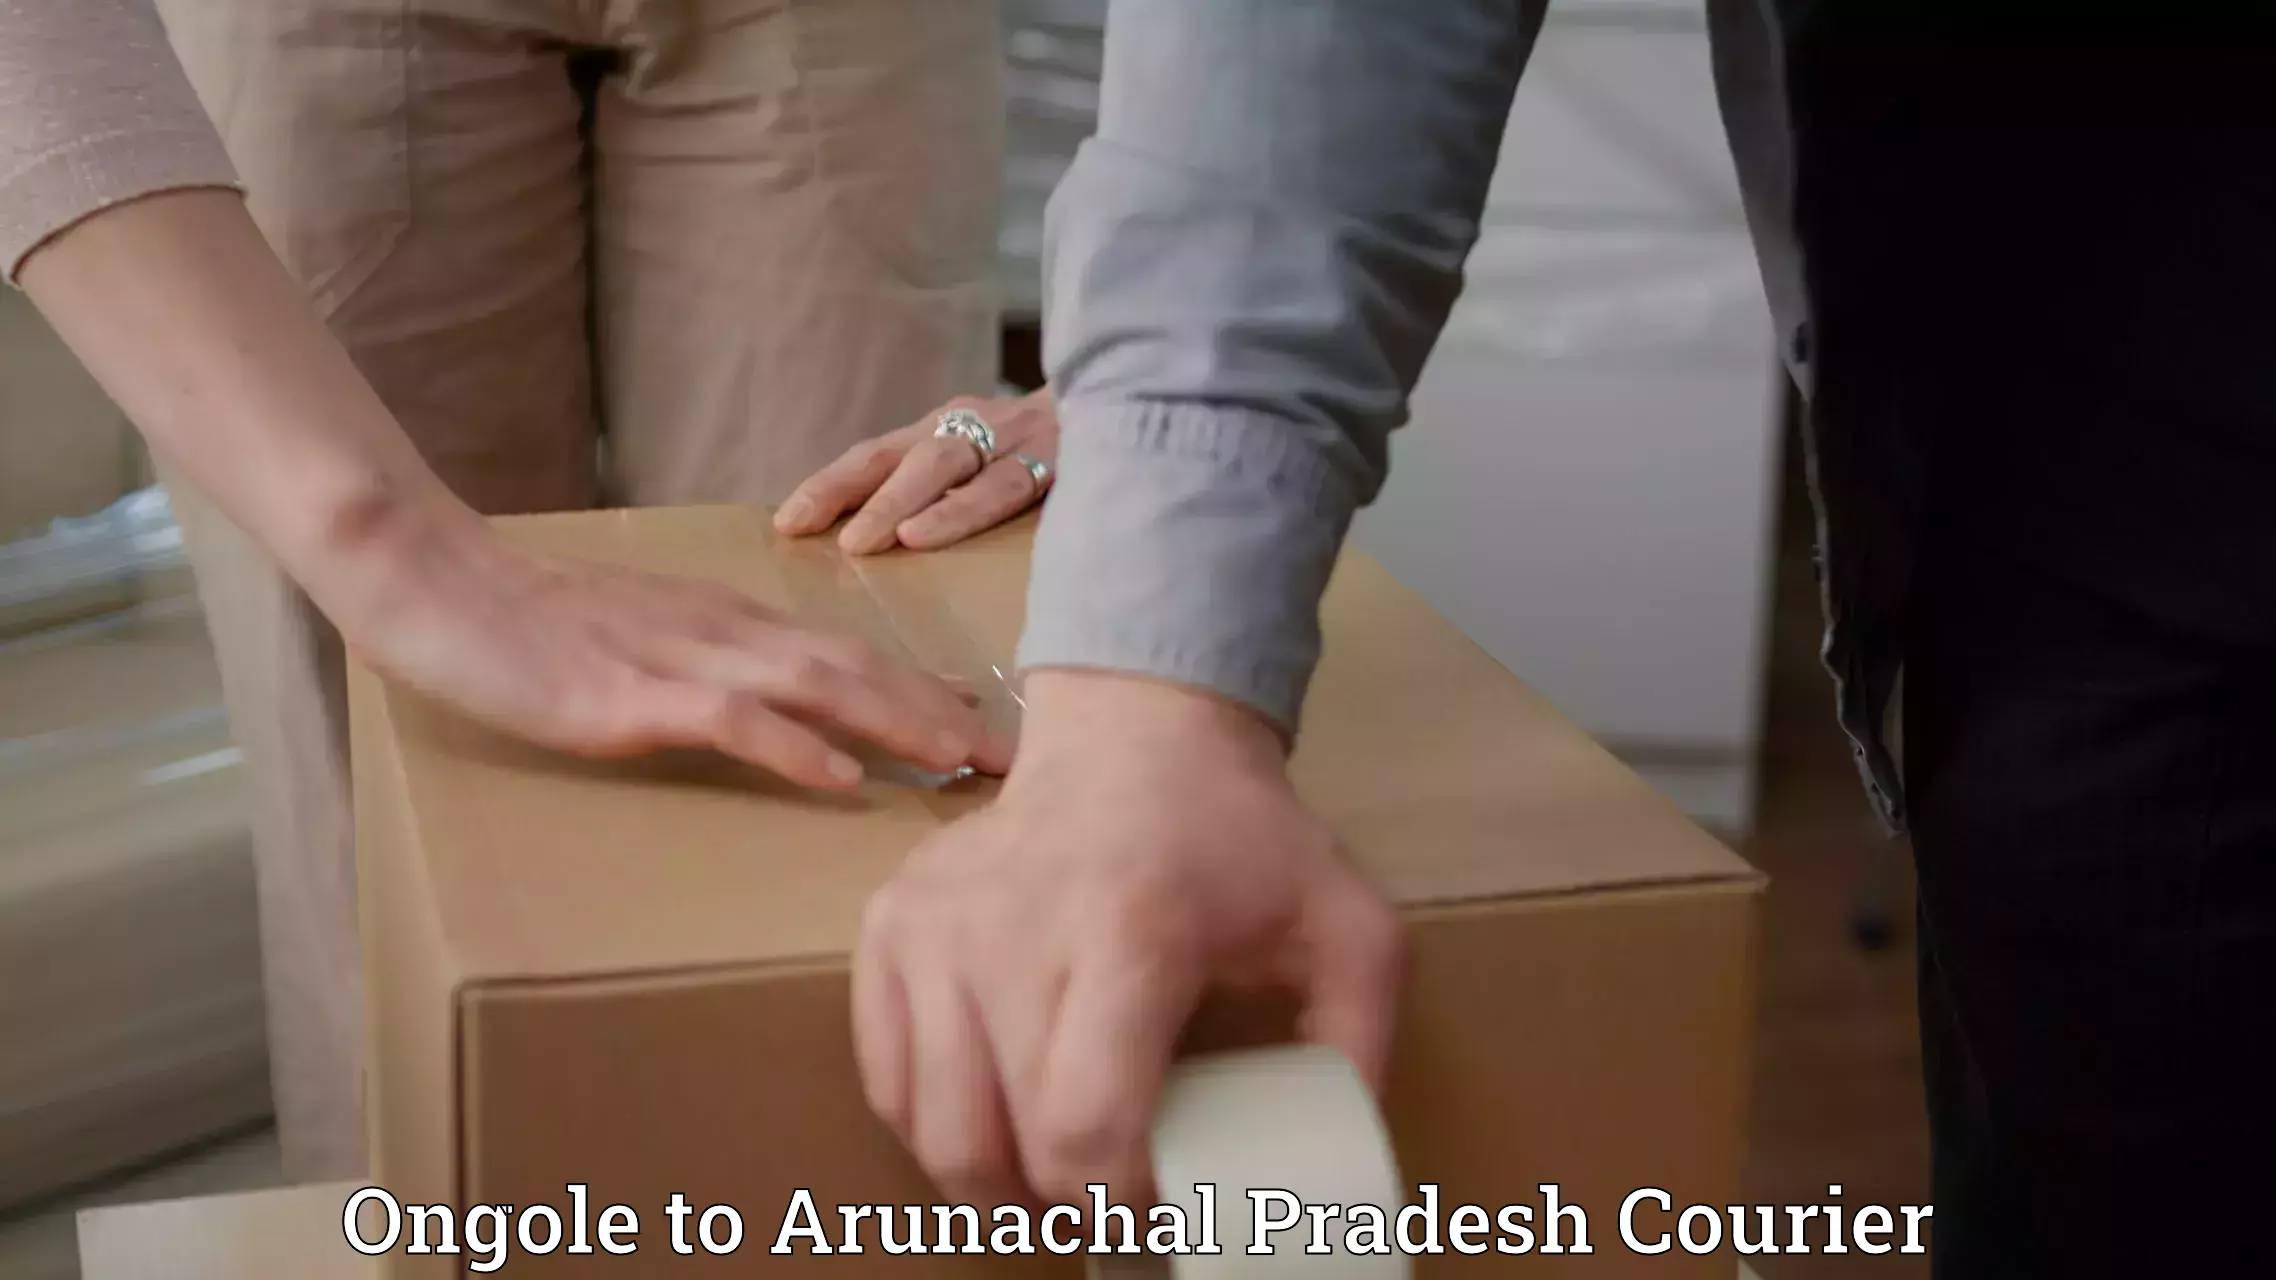 Courier membership in Ongole to Likabali